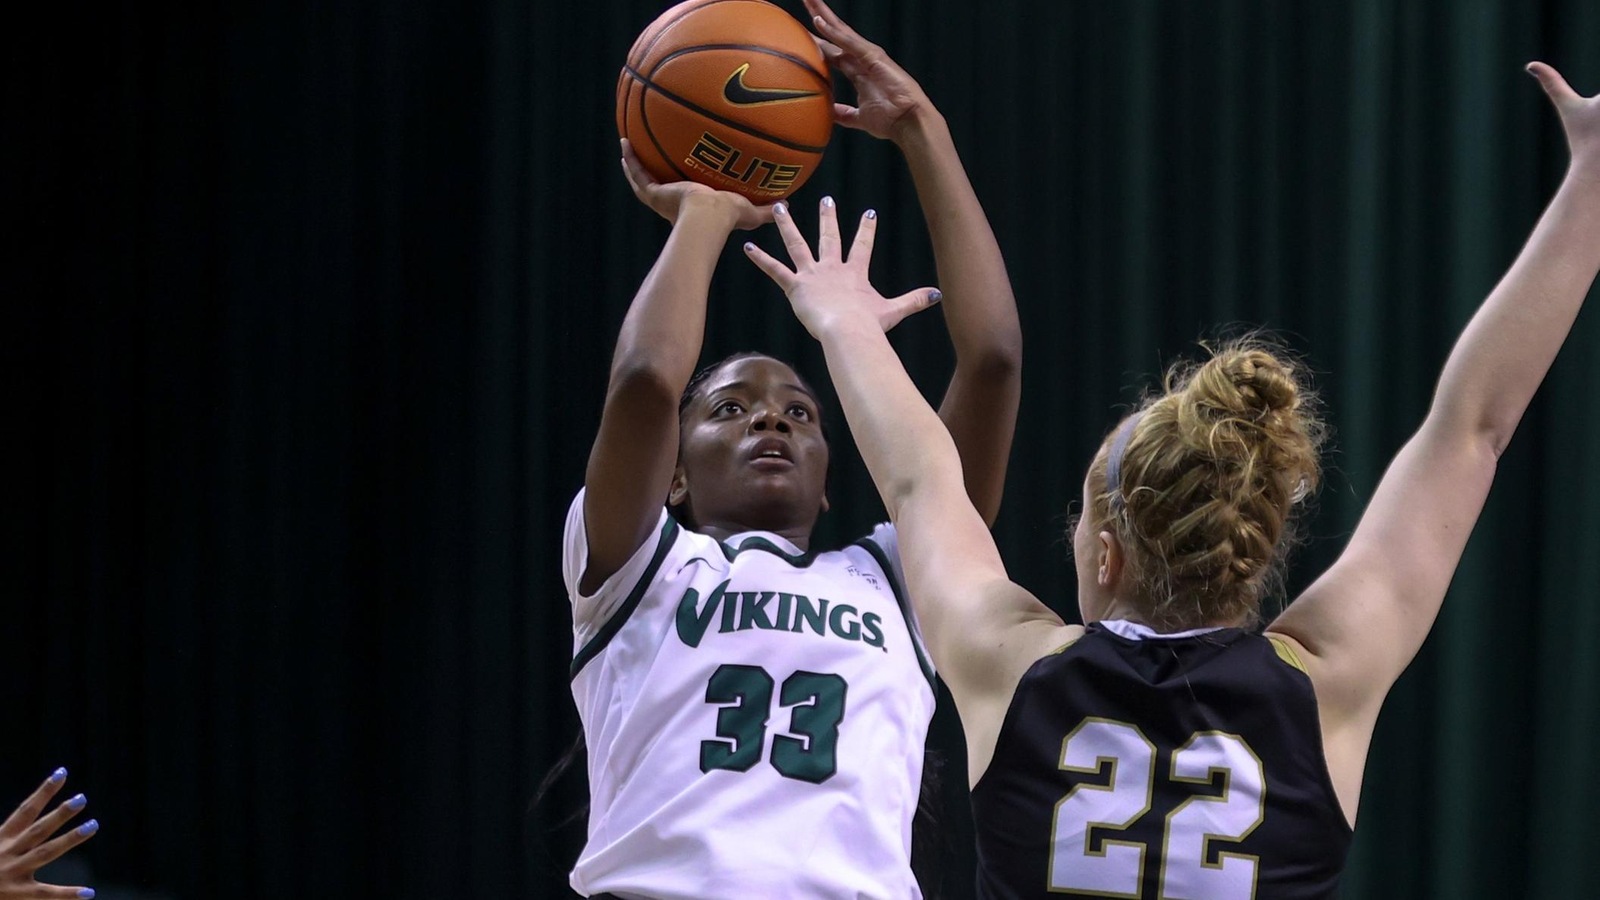 Cleveland State Women’s Basketball Picks Up 85-59 Victory Over Purdue Fort Wayne